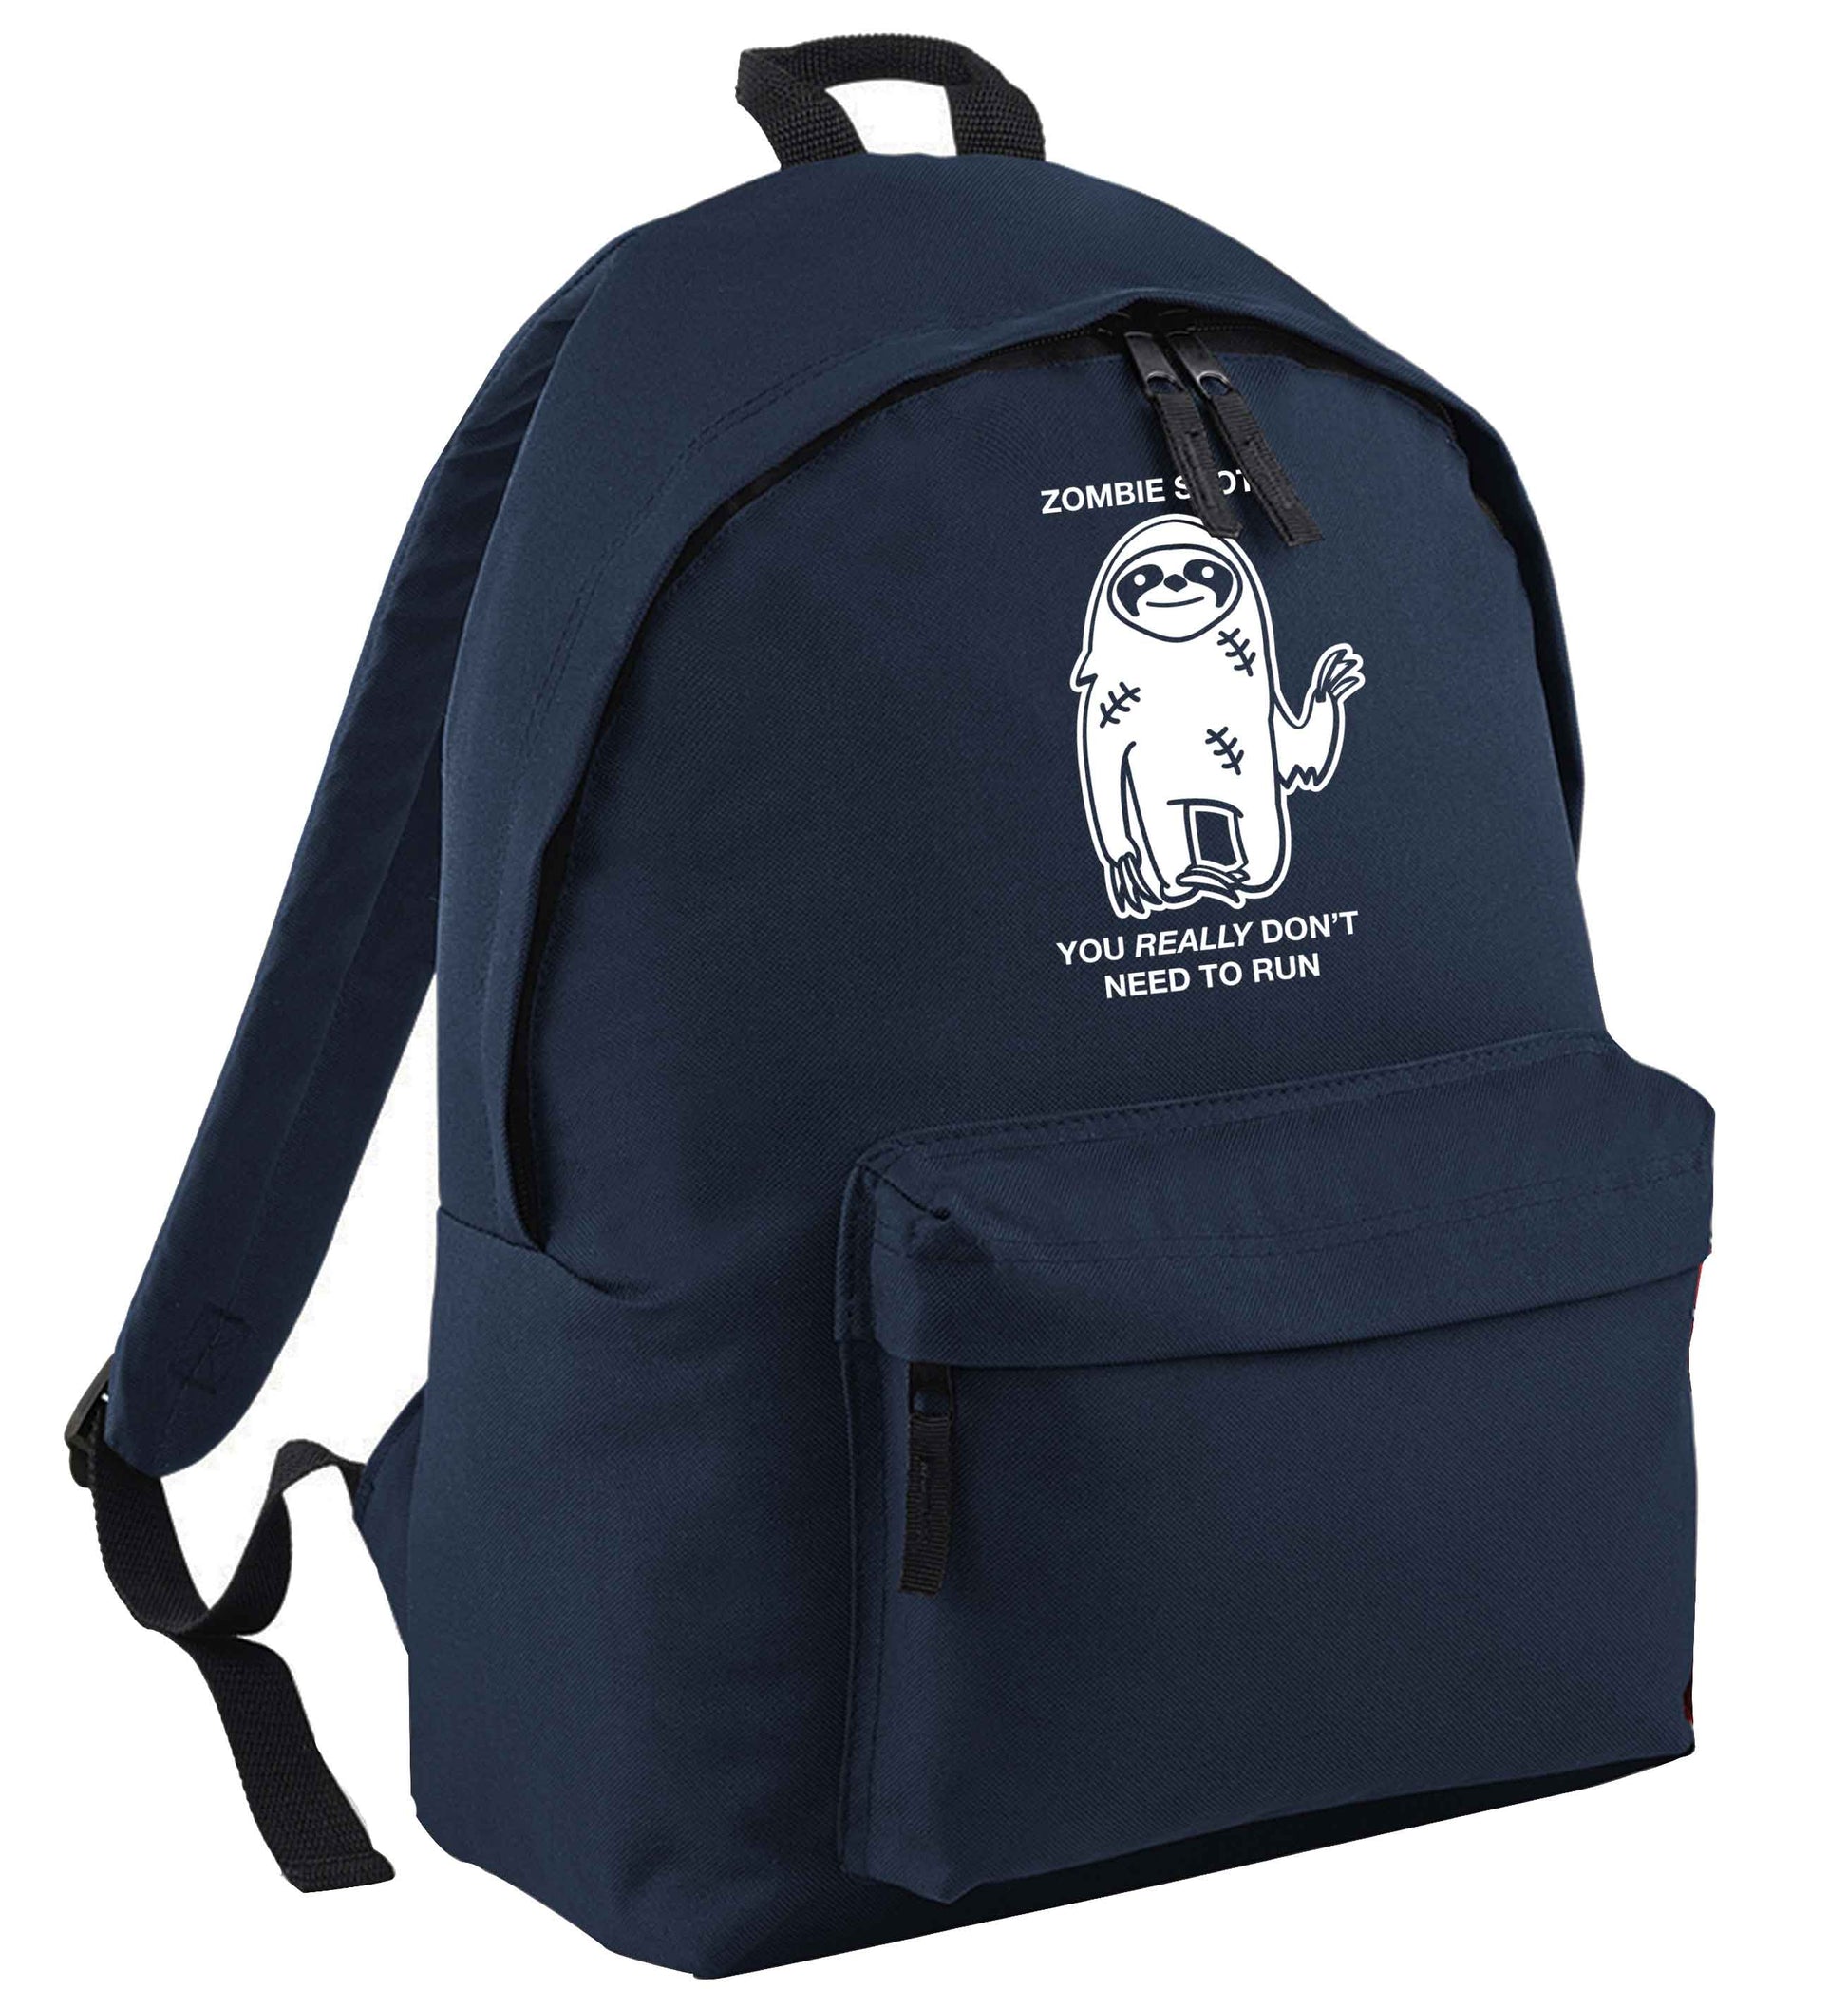 Zombie sloth you really don't need to run | Children's backpack